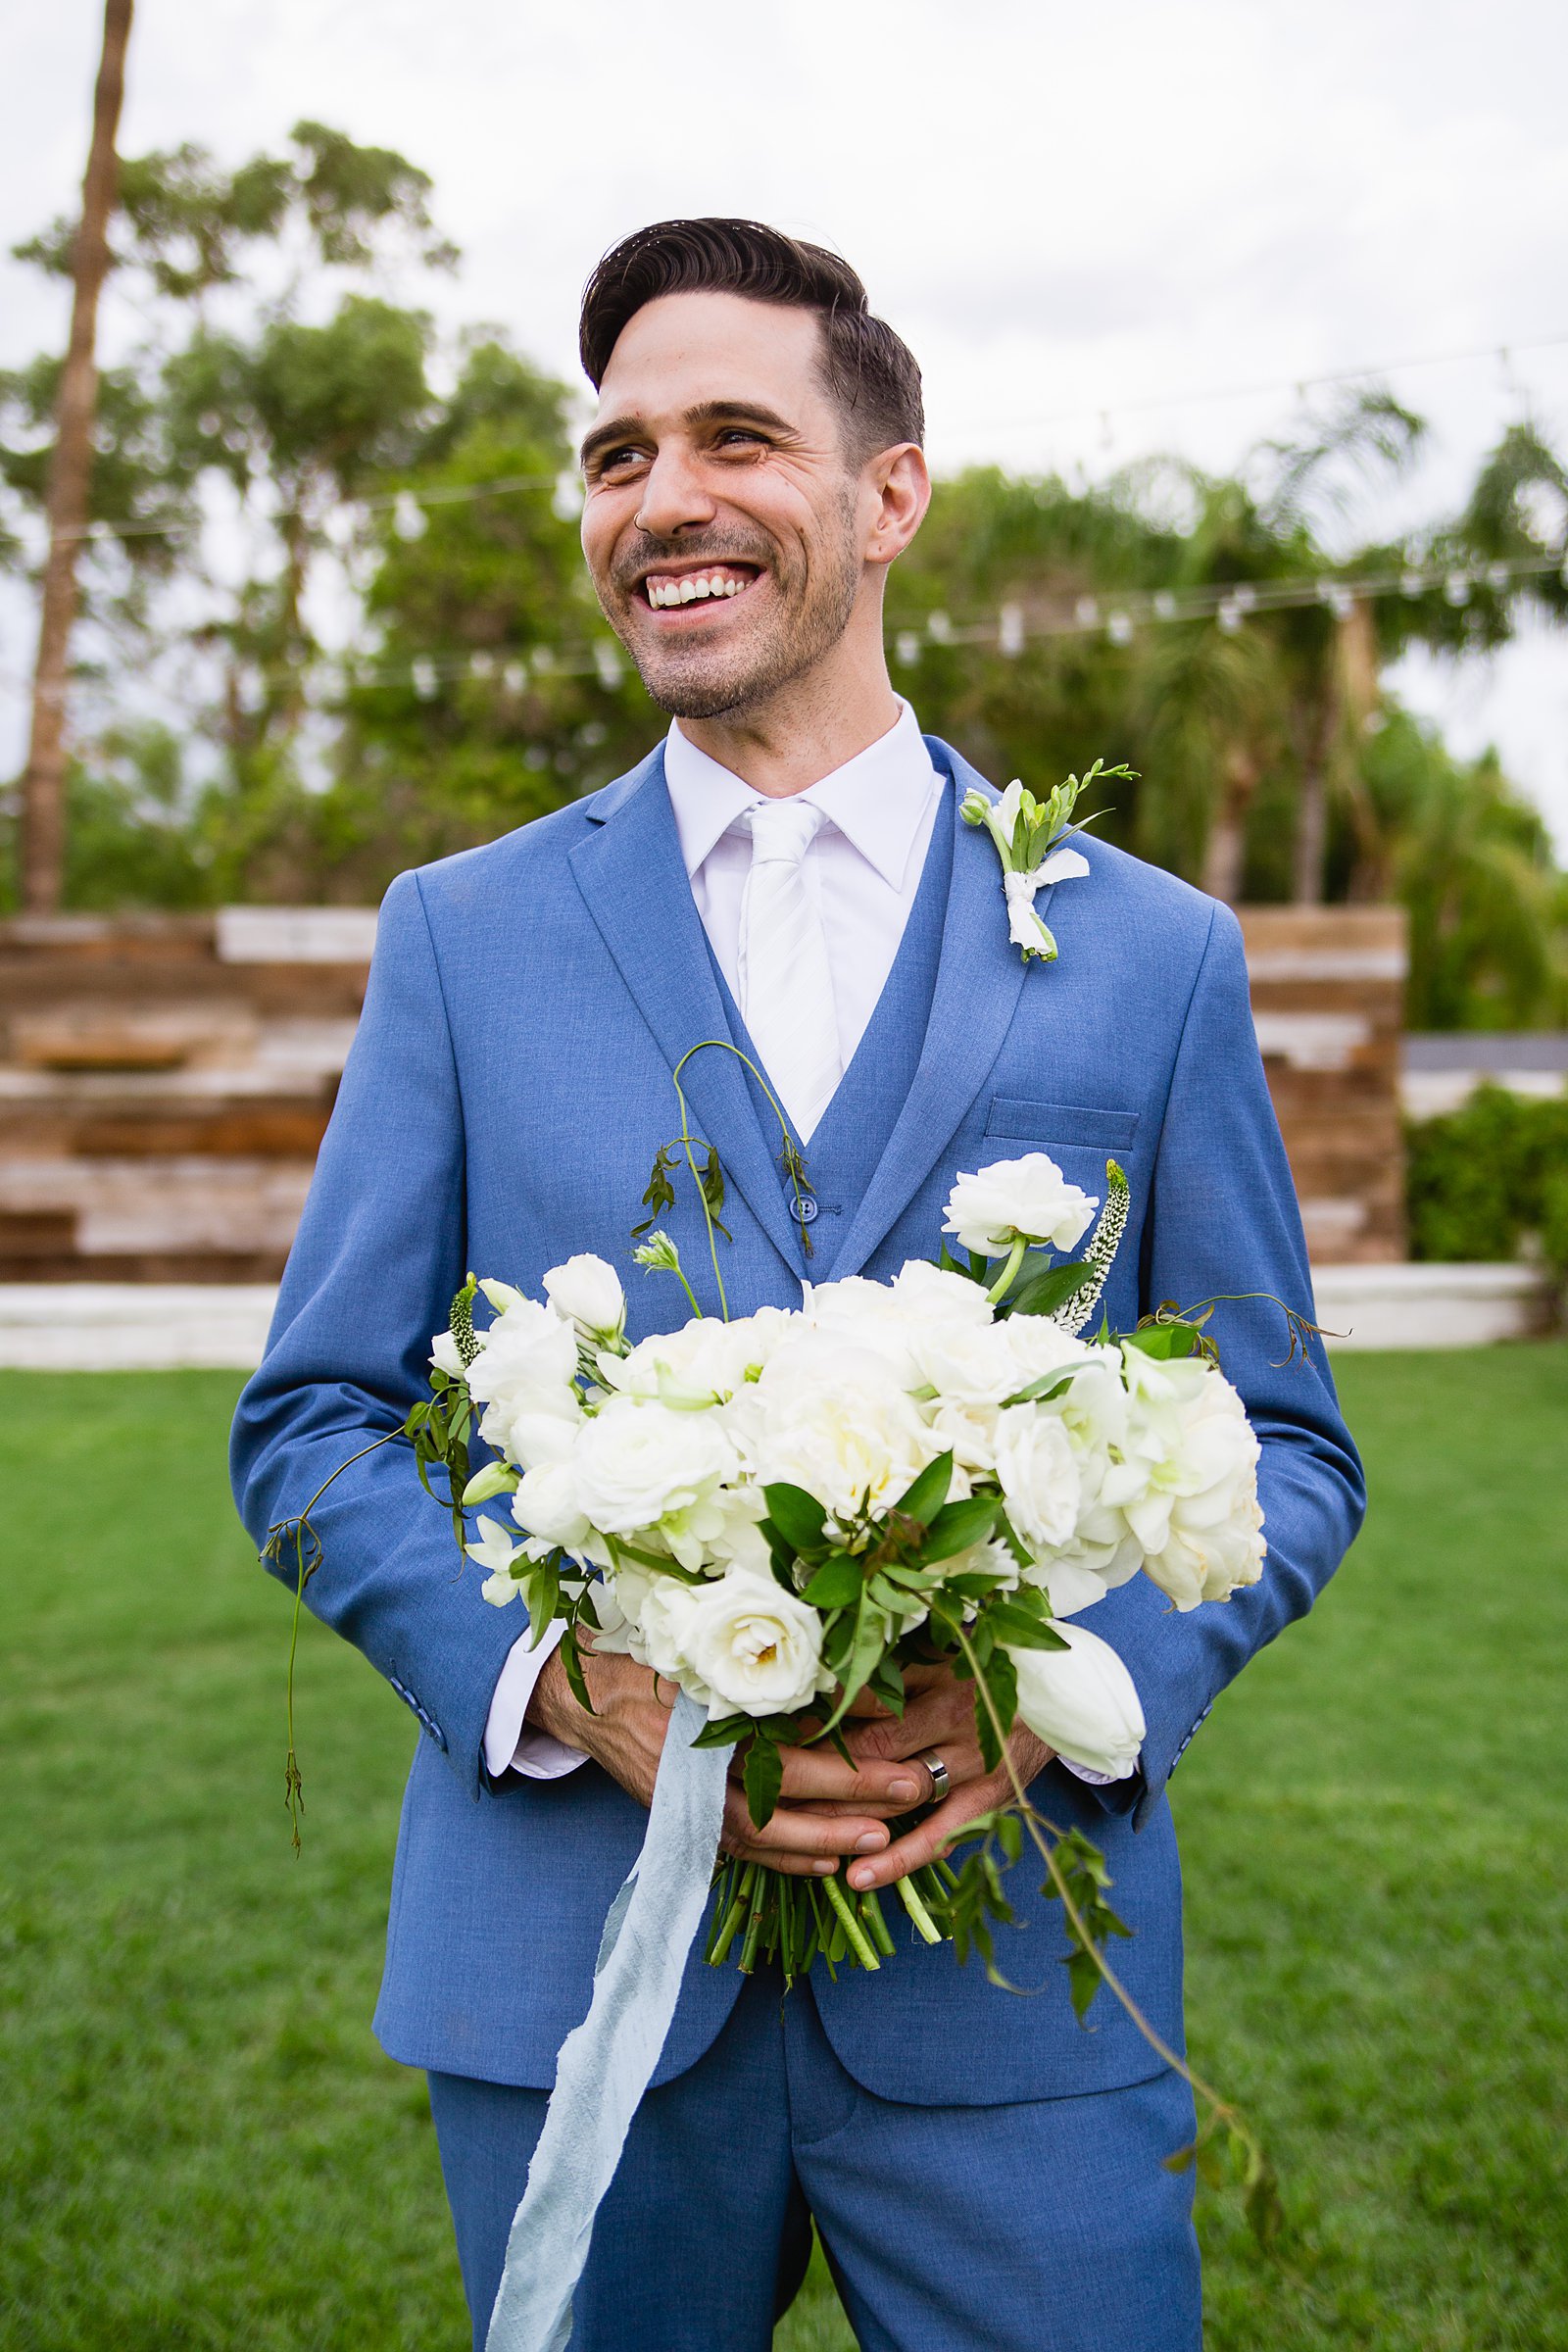 Groom laughing while holding a white garden inspired bouquet by PMA Photography.